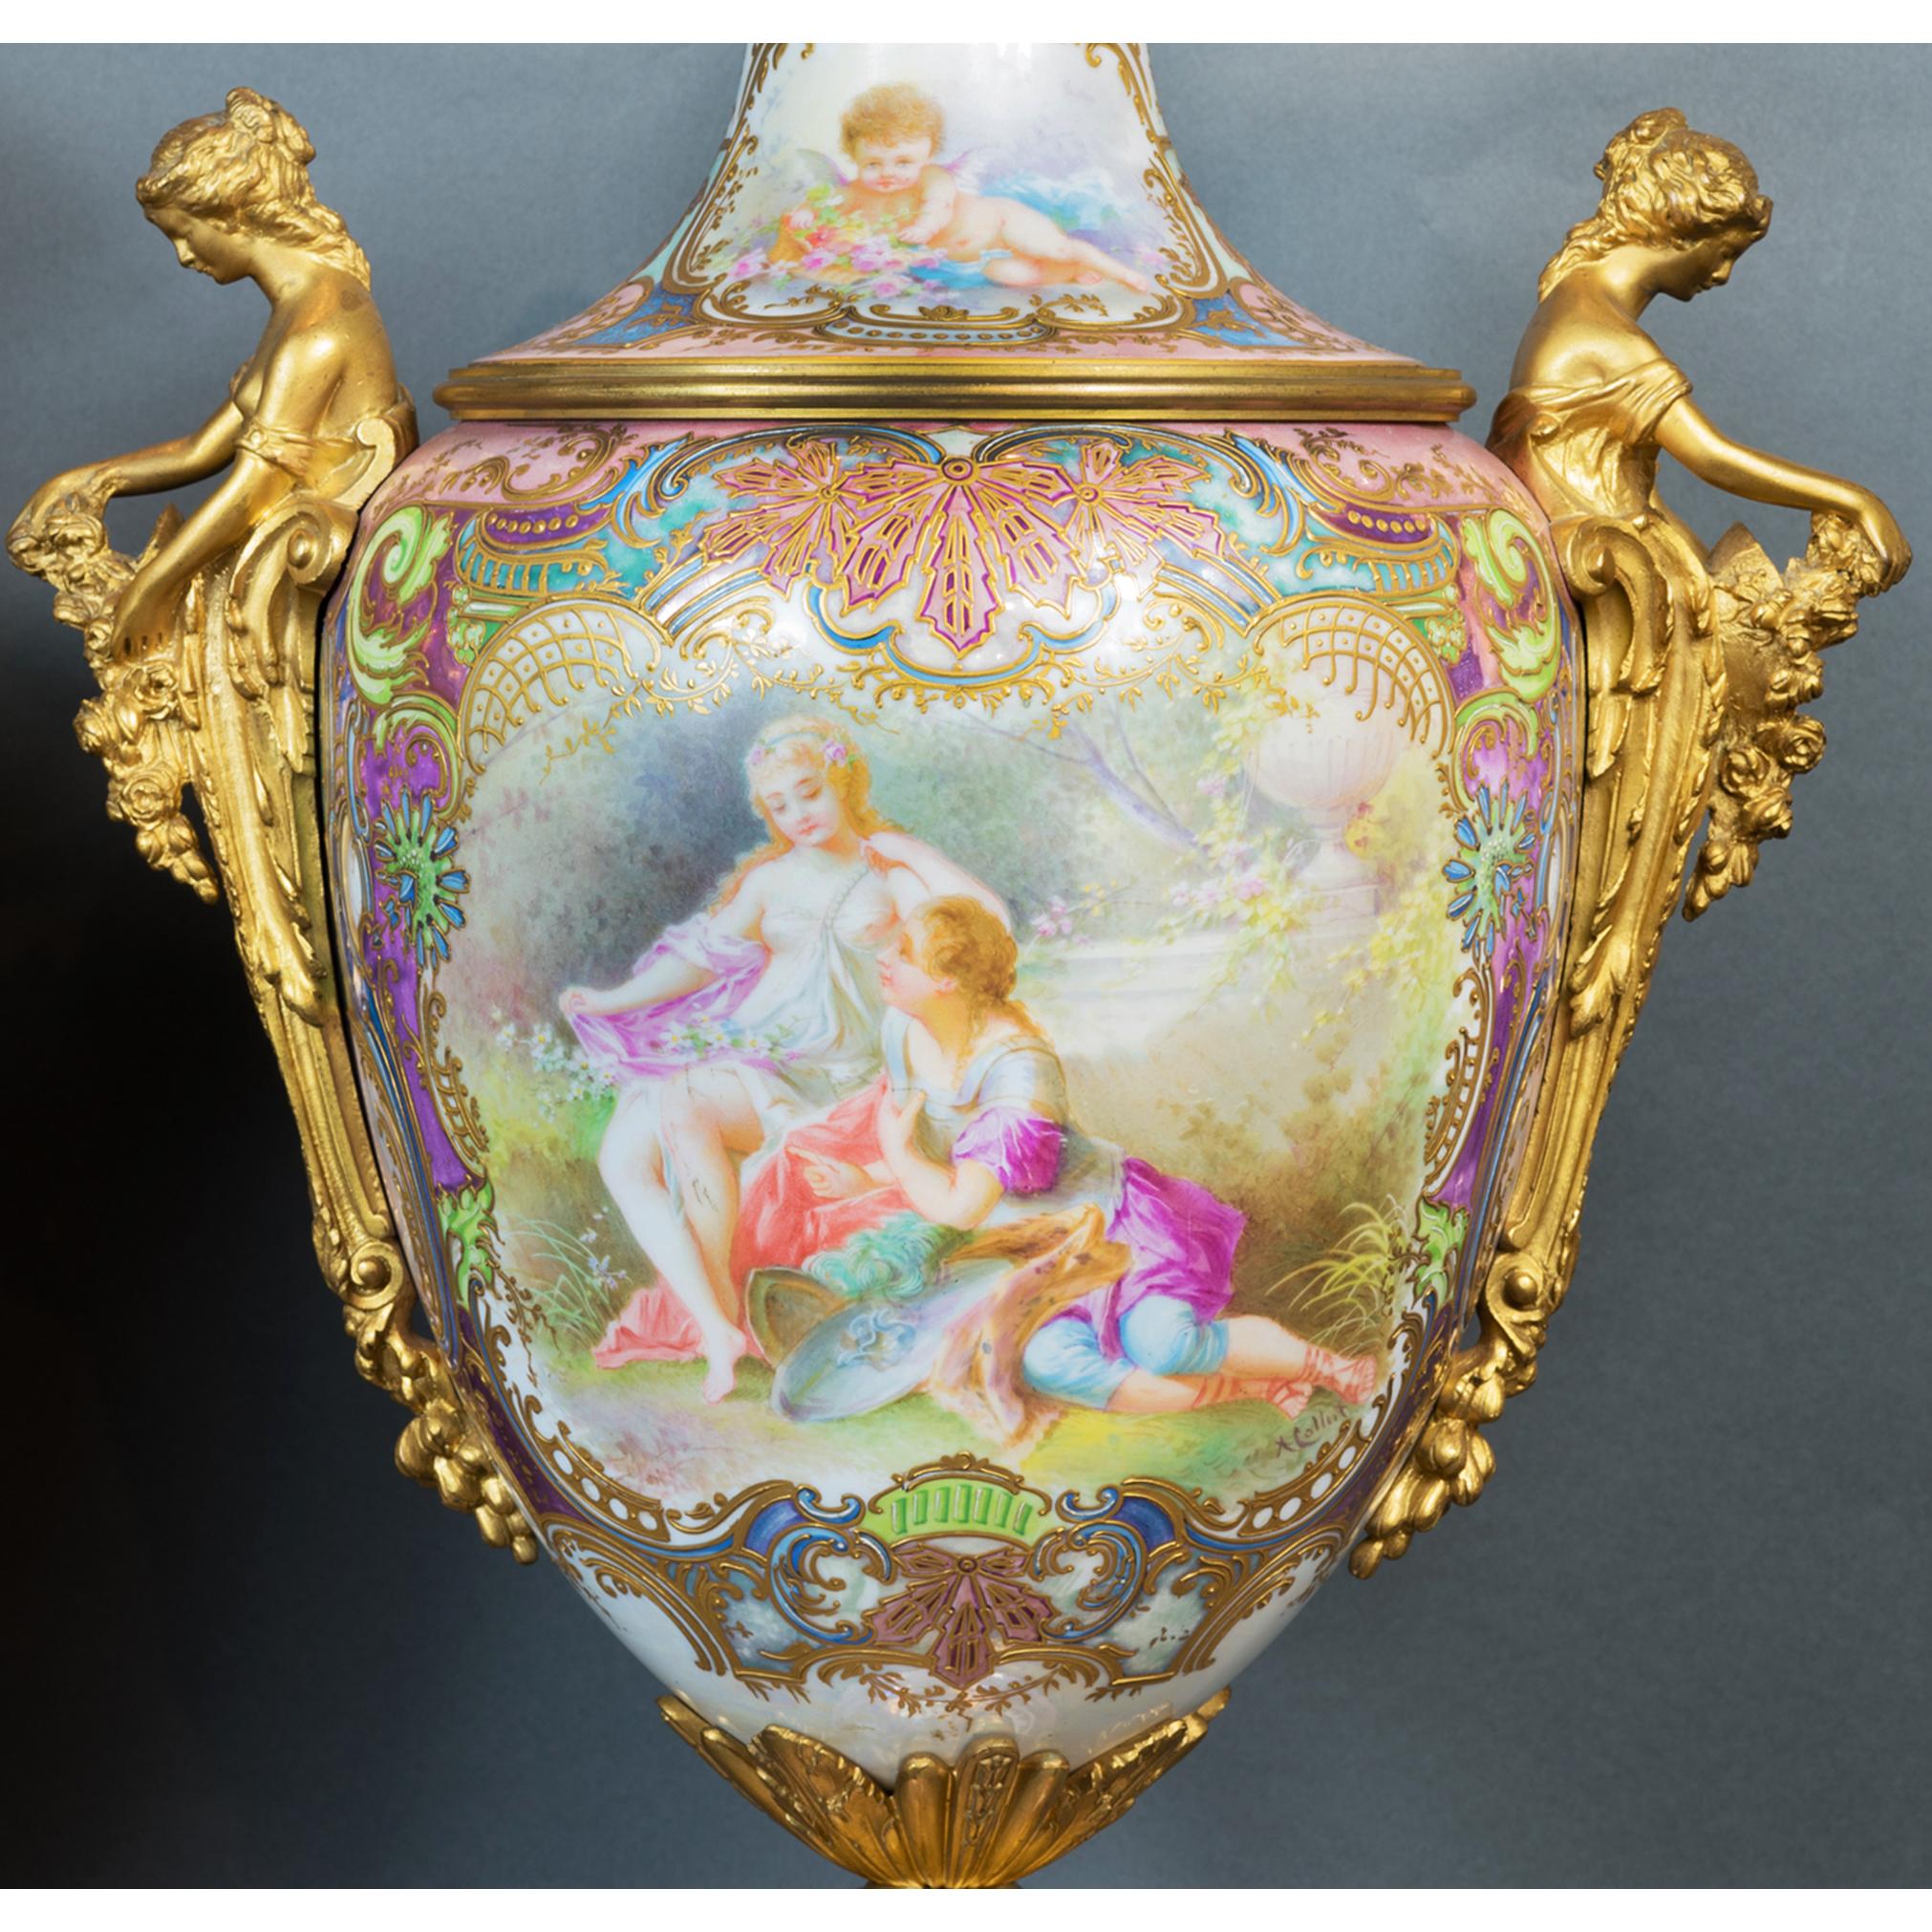 Pair of ormolu-mounted sevres style porcelain iridescent-polychrome vases and covers with two female figures relaxing in a lush garden, each vase depicting a different moment in the garden. Gilt bronze ornamentation and bases with foliage and